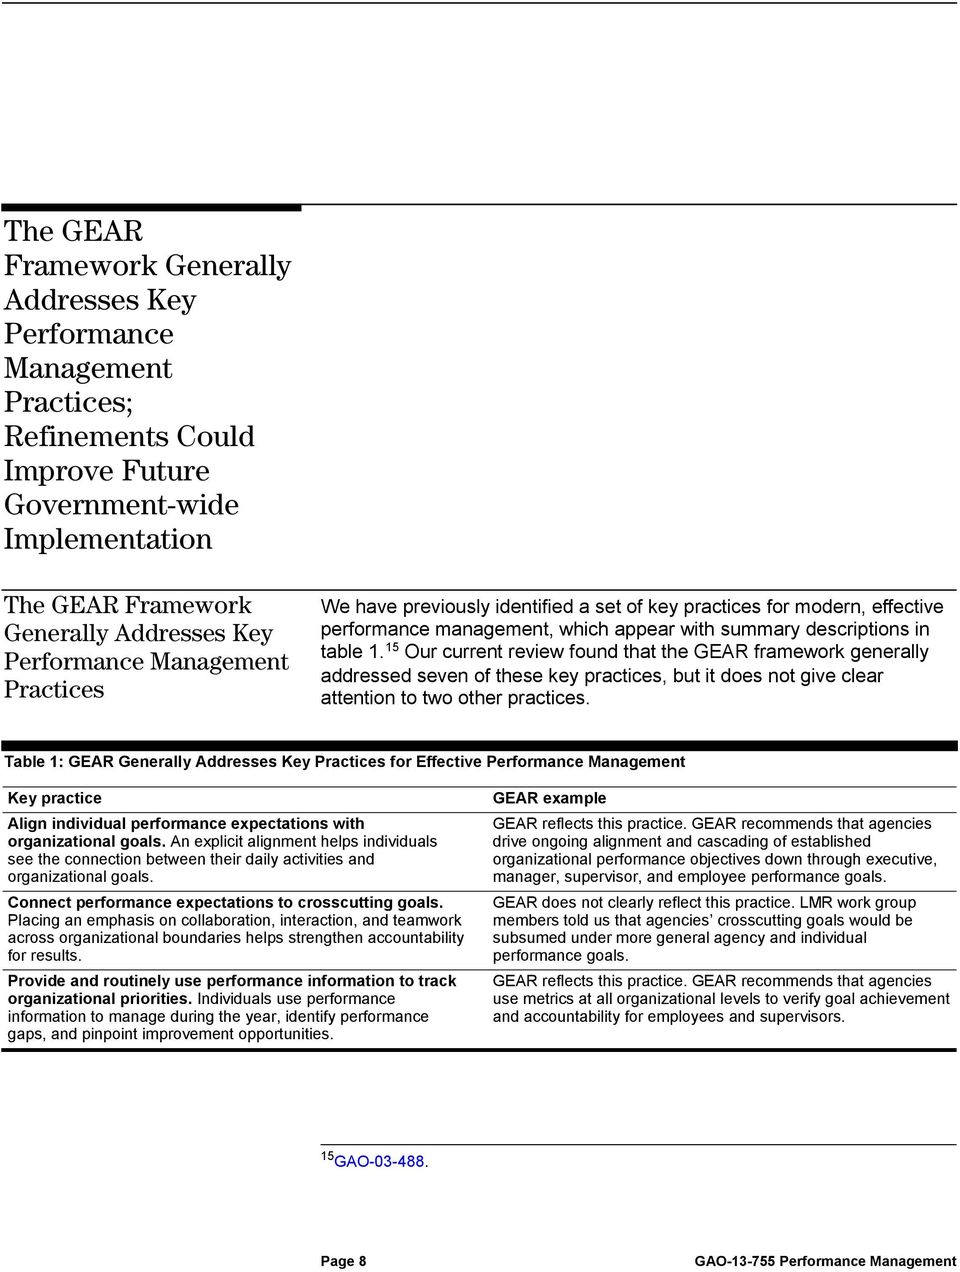 15 Our current review found that the GEAR framework generally addressed seven of these key practices, but it does not give clear attention to two other practices.